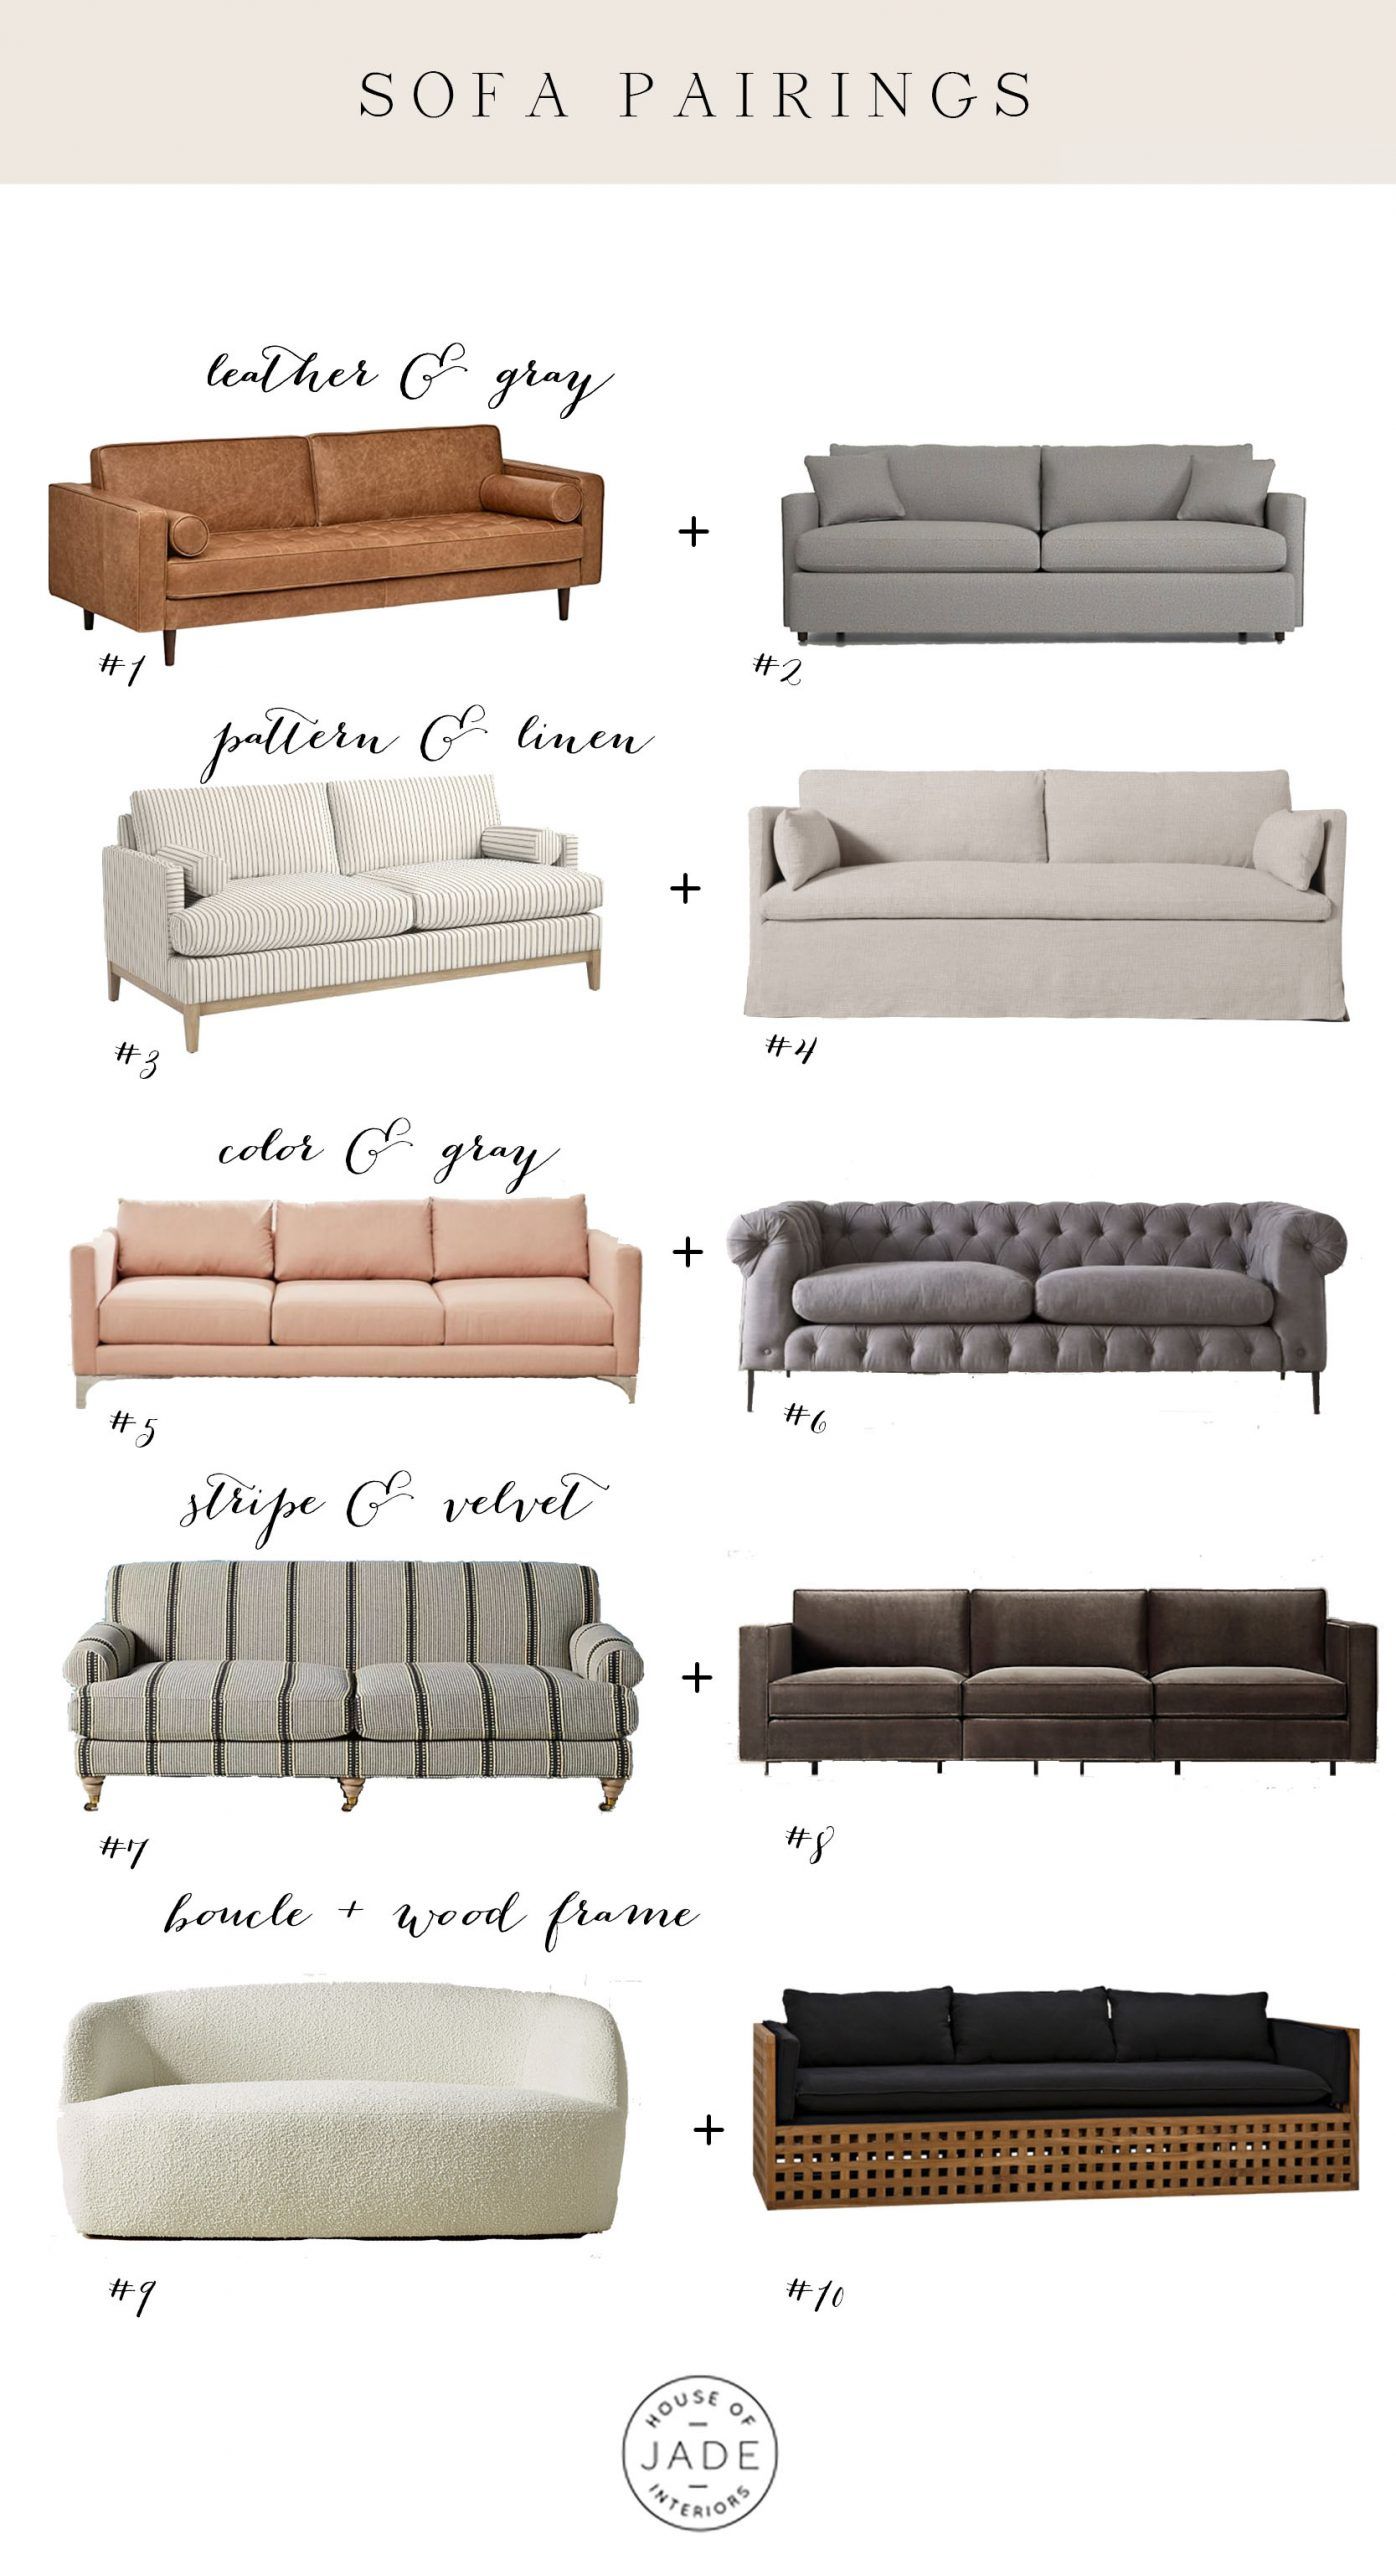 Sofa Pairing Tips | House Of Jade Interiors Within Sofas In Multiple Colors (View 4 of 15)